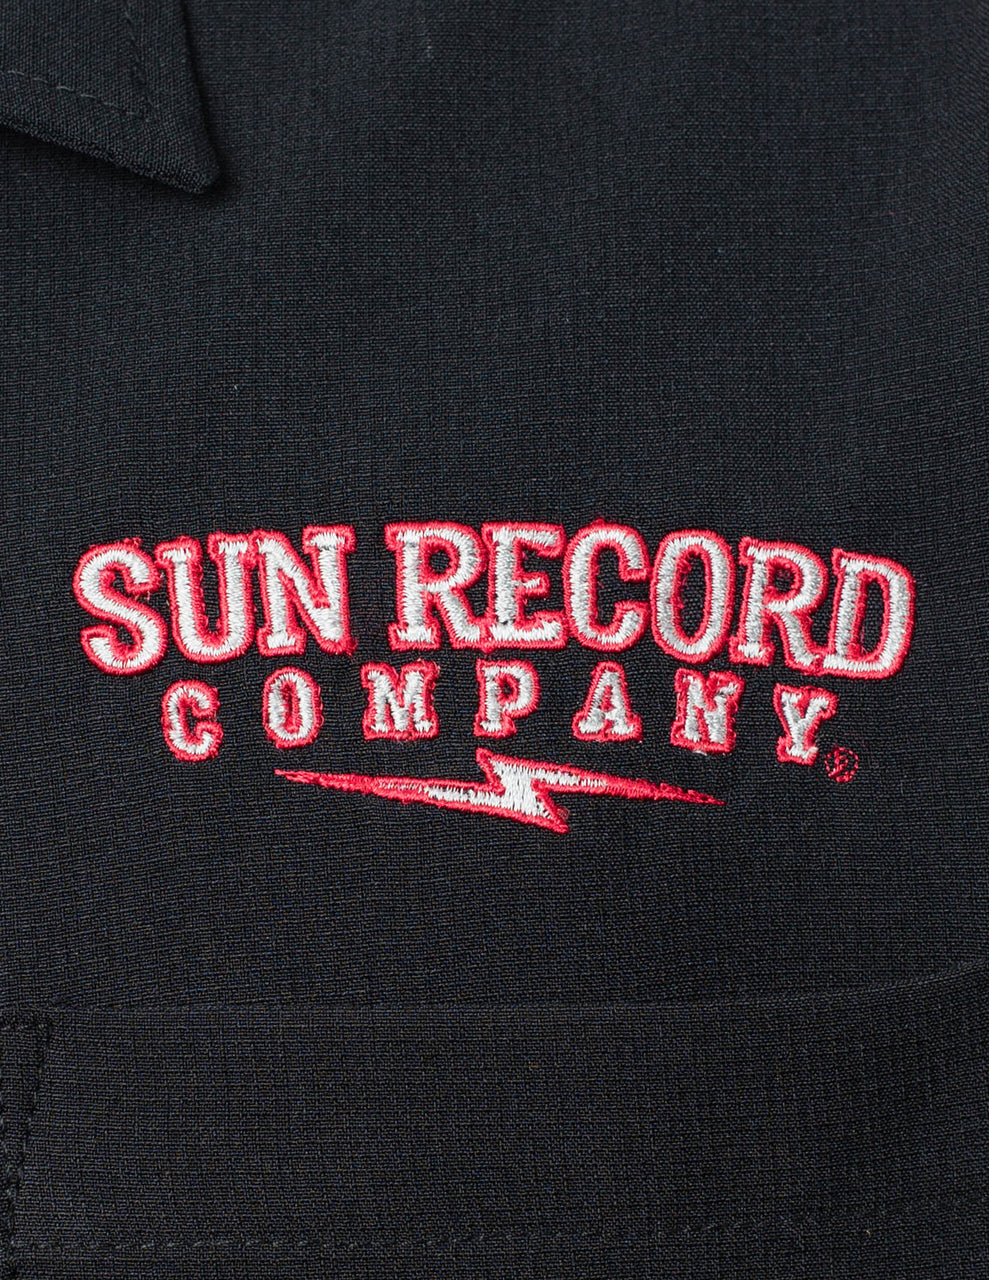 Sun Records Rockabilly Sound Piped Panel Bowling Shirt in Black by Steady Clothing